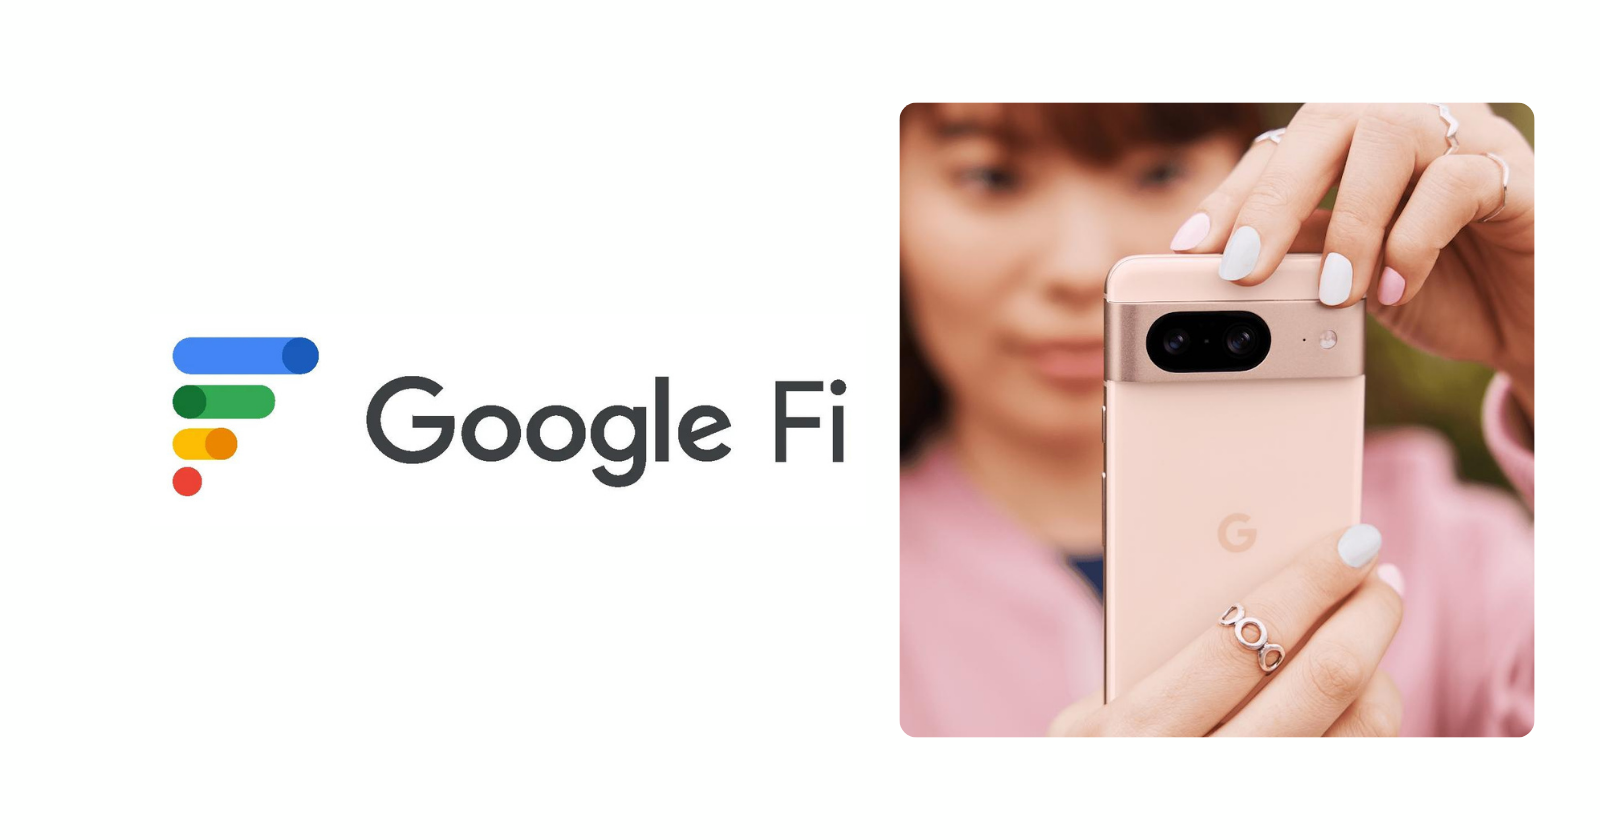 Here are the latest deals on Google Pixel devices on Google Fi in the USA